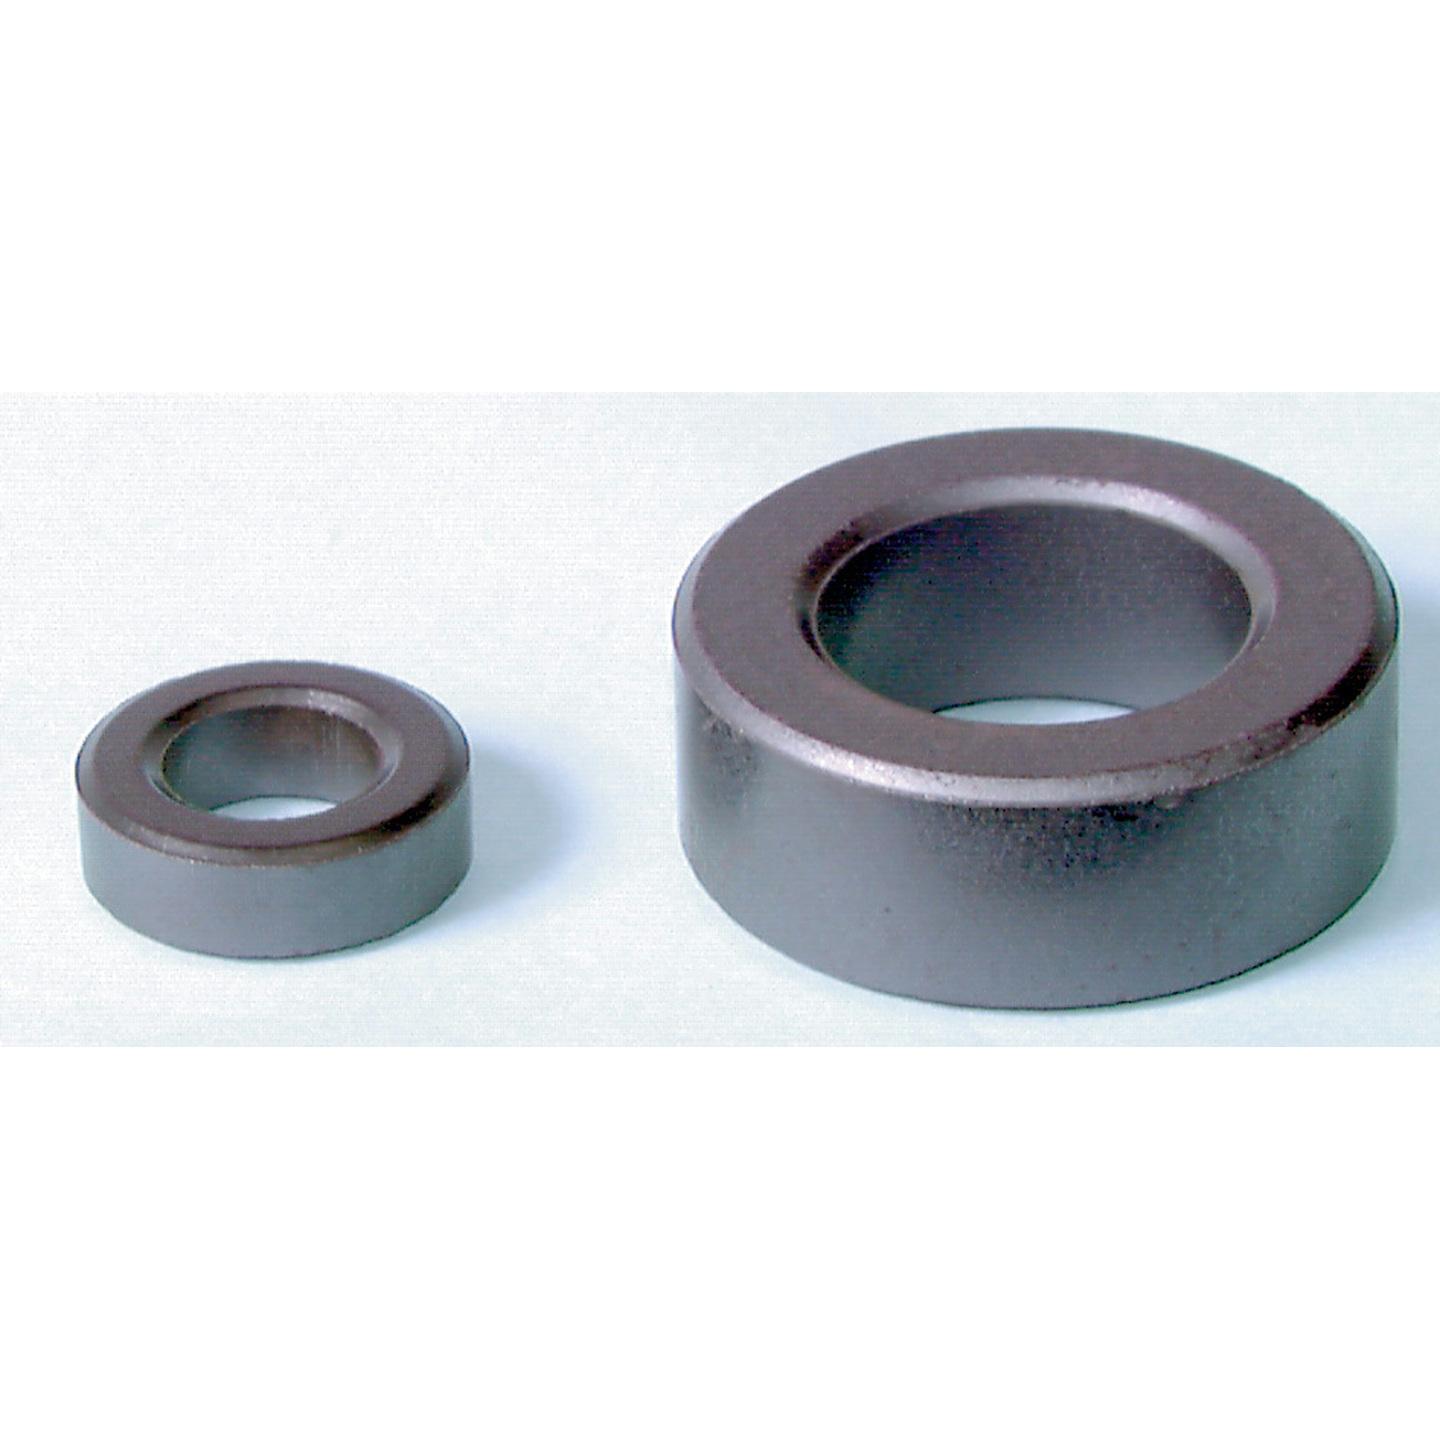 L8 - 18x10x6mm Toroid or Ring Core - Pack of 6